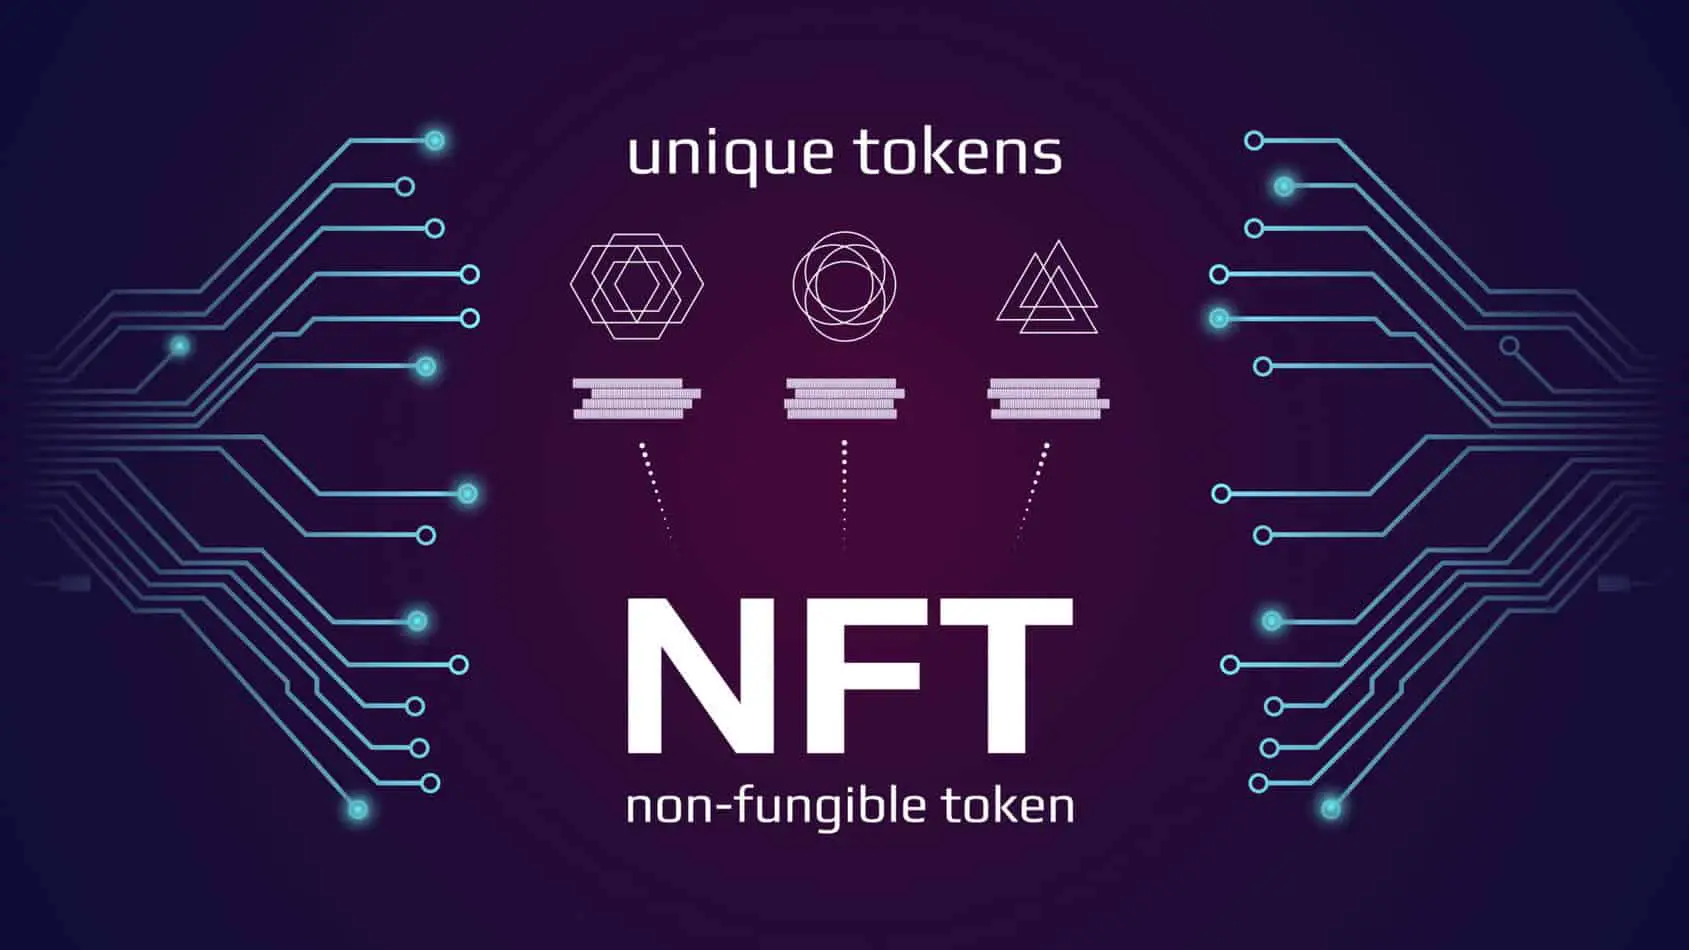 blockchain and nft explained